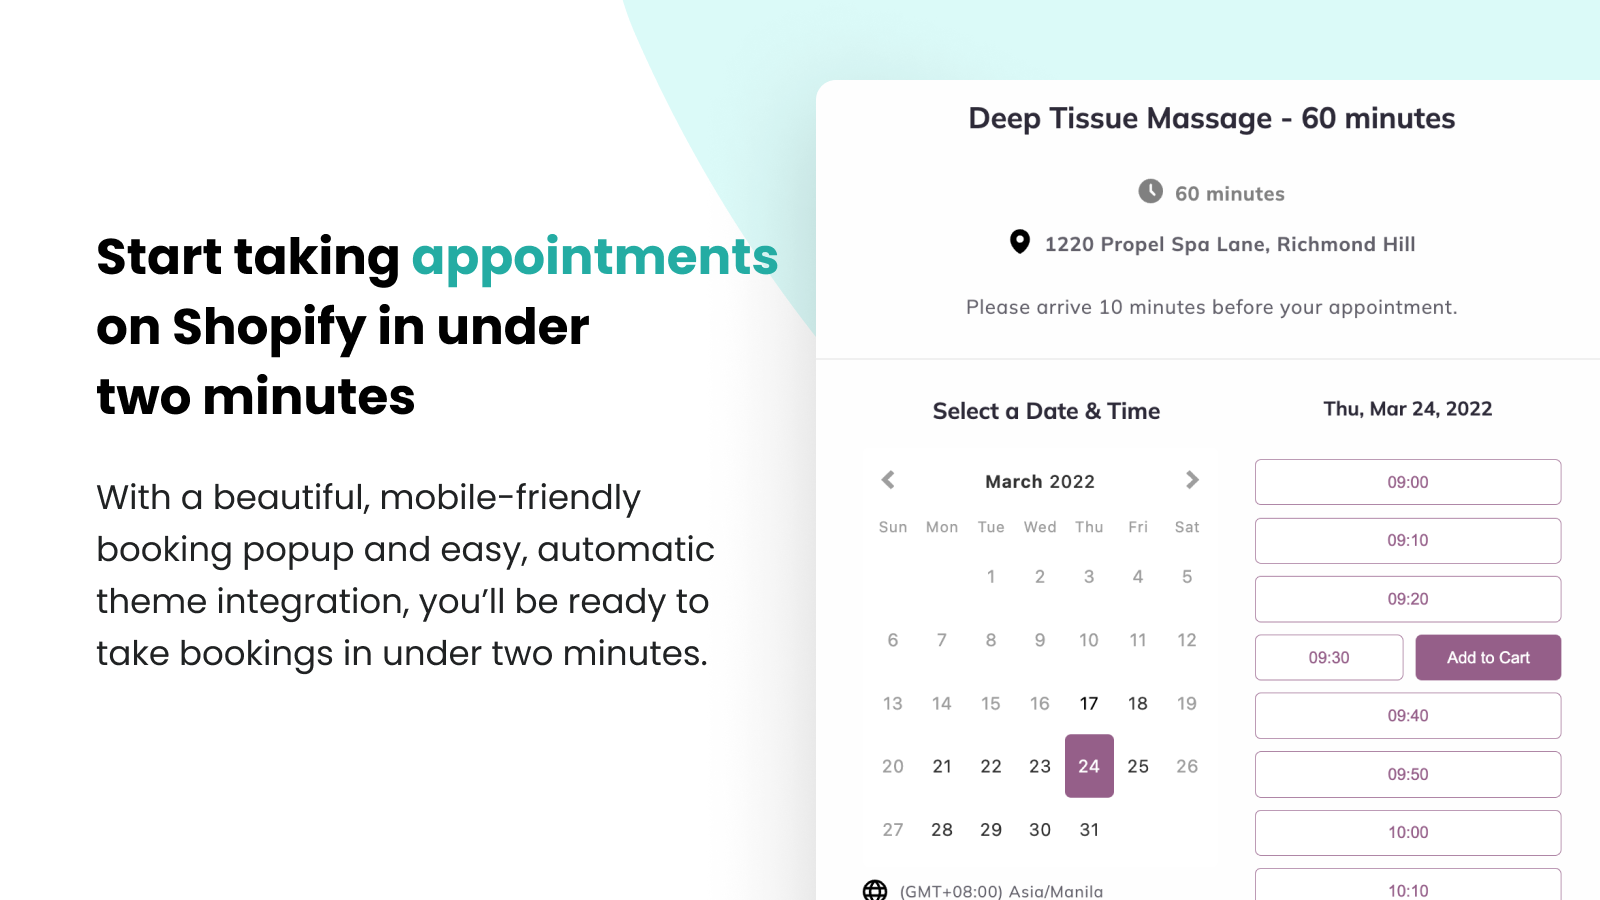 Start taking appointments on Shopify in under 2 minutes